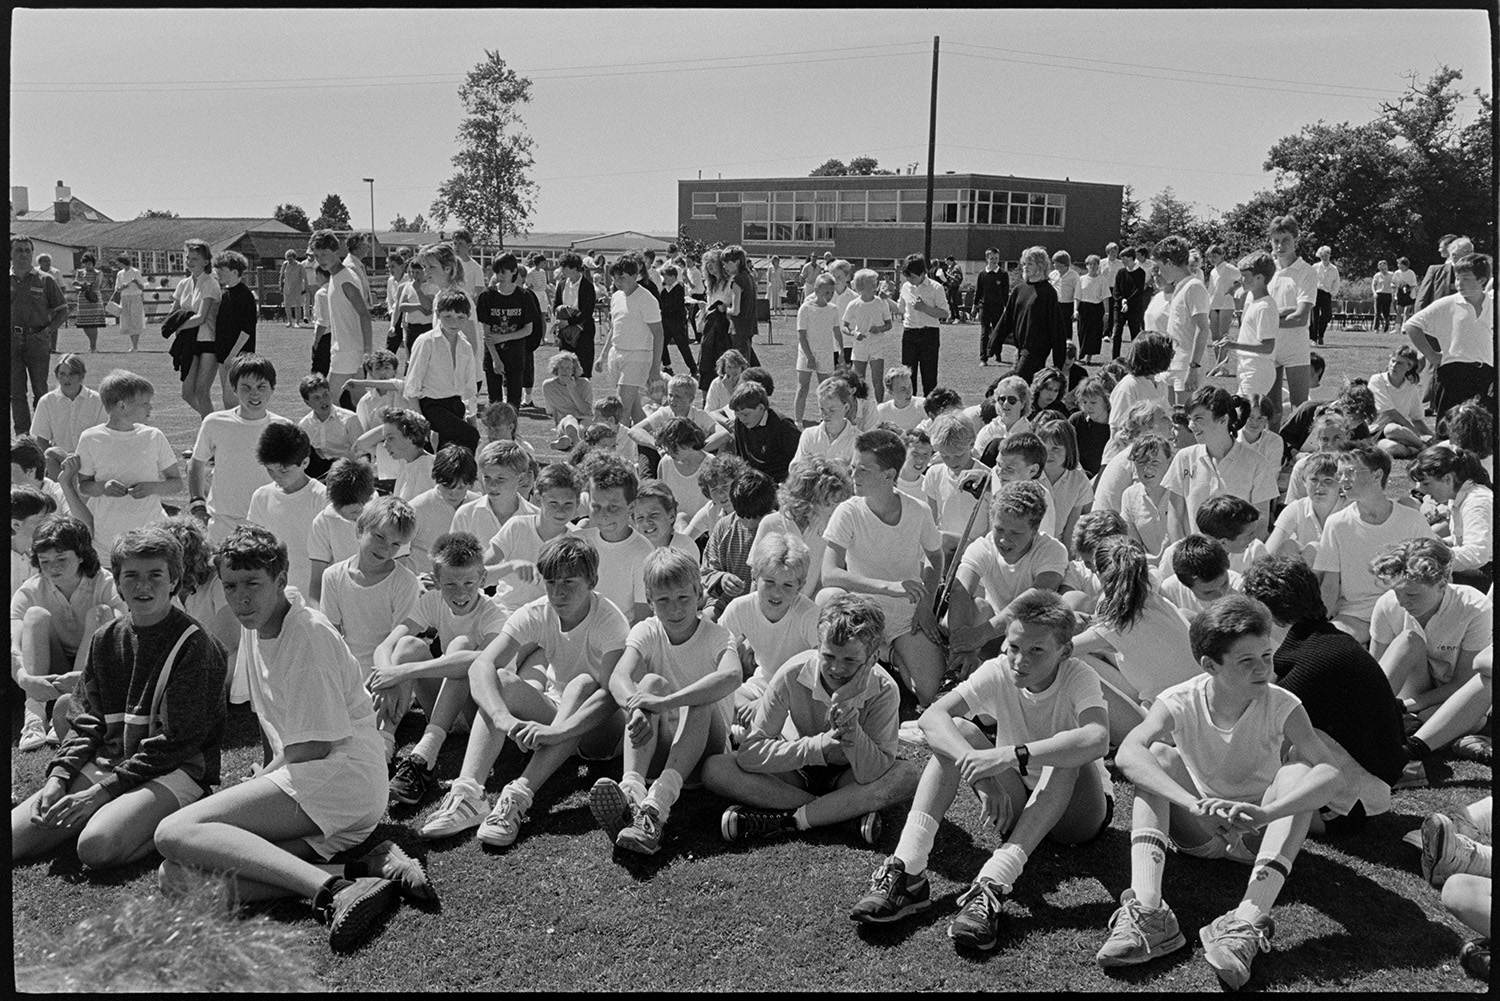 School sports, pupils gathered for prize giving, crowd.
[School pupils are gathered for a prize giving event after the school sports day at Chulmleigh Community College. Most are sitting on the grass in white t-shirts. More students and school buildings are visible in the background.]